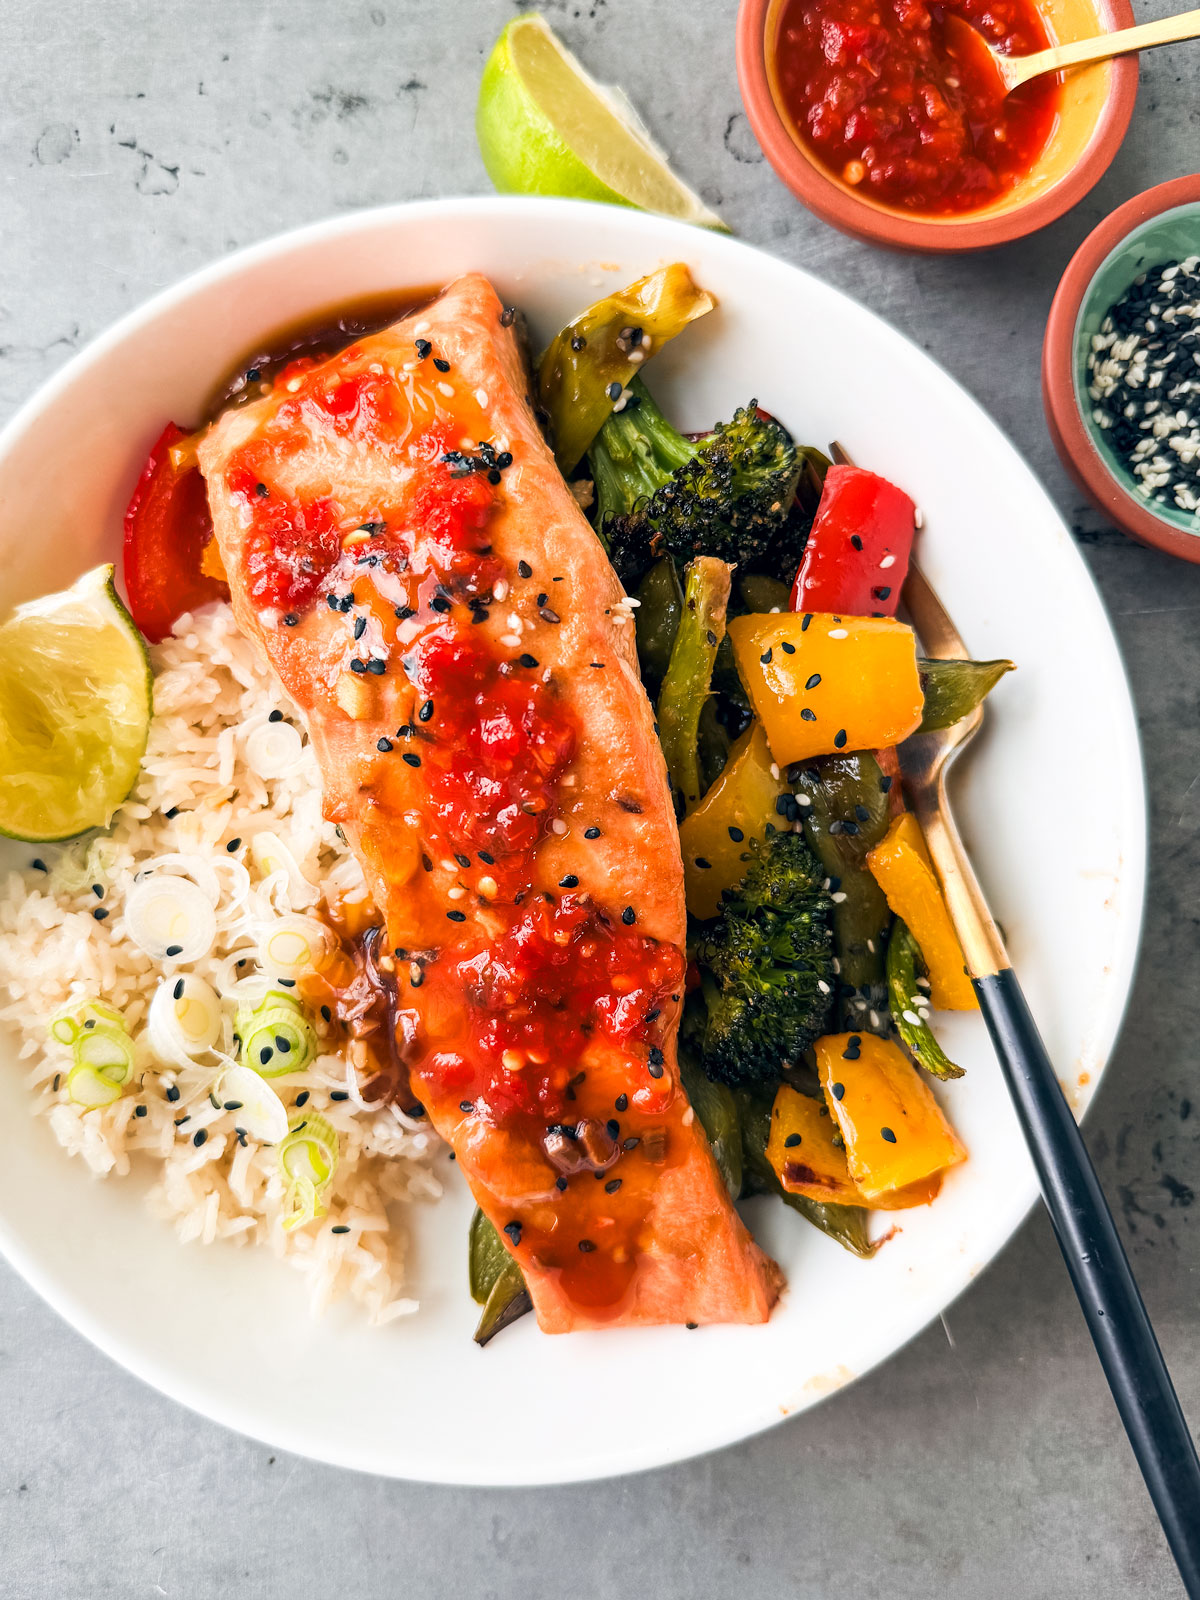 Salmon fillet with chili sauce over vegetables and rice on a plate.